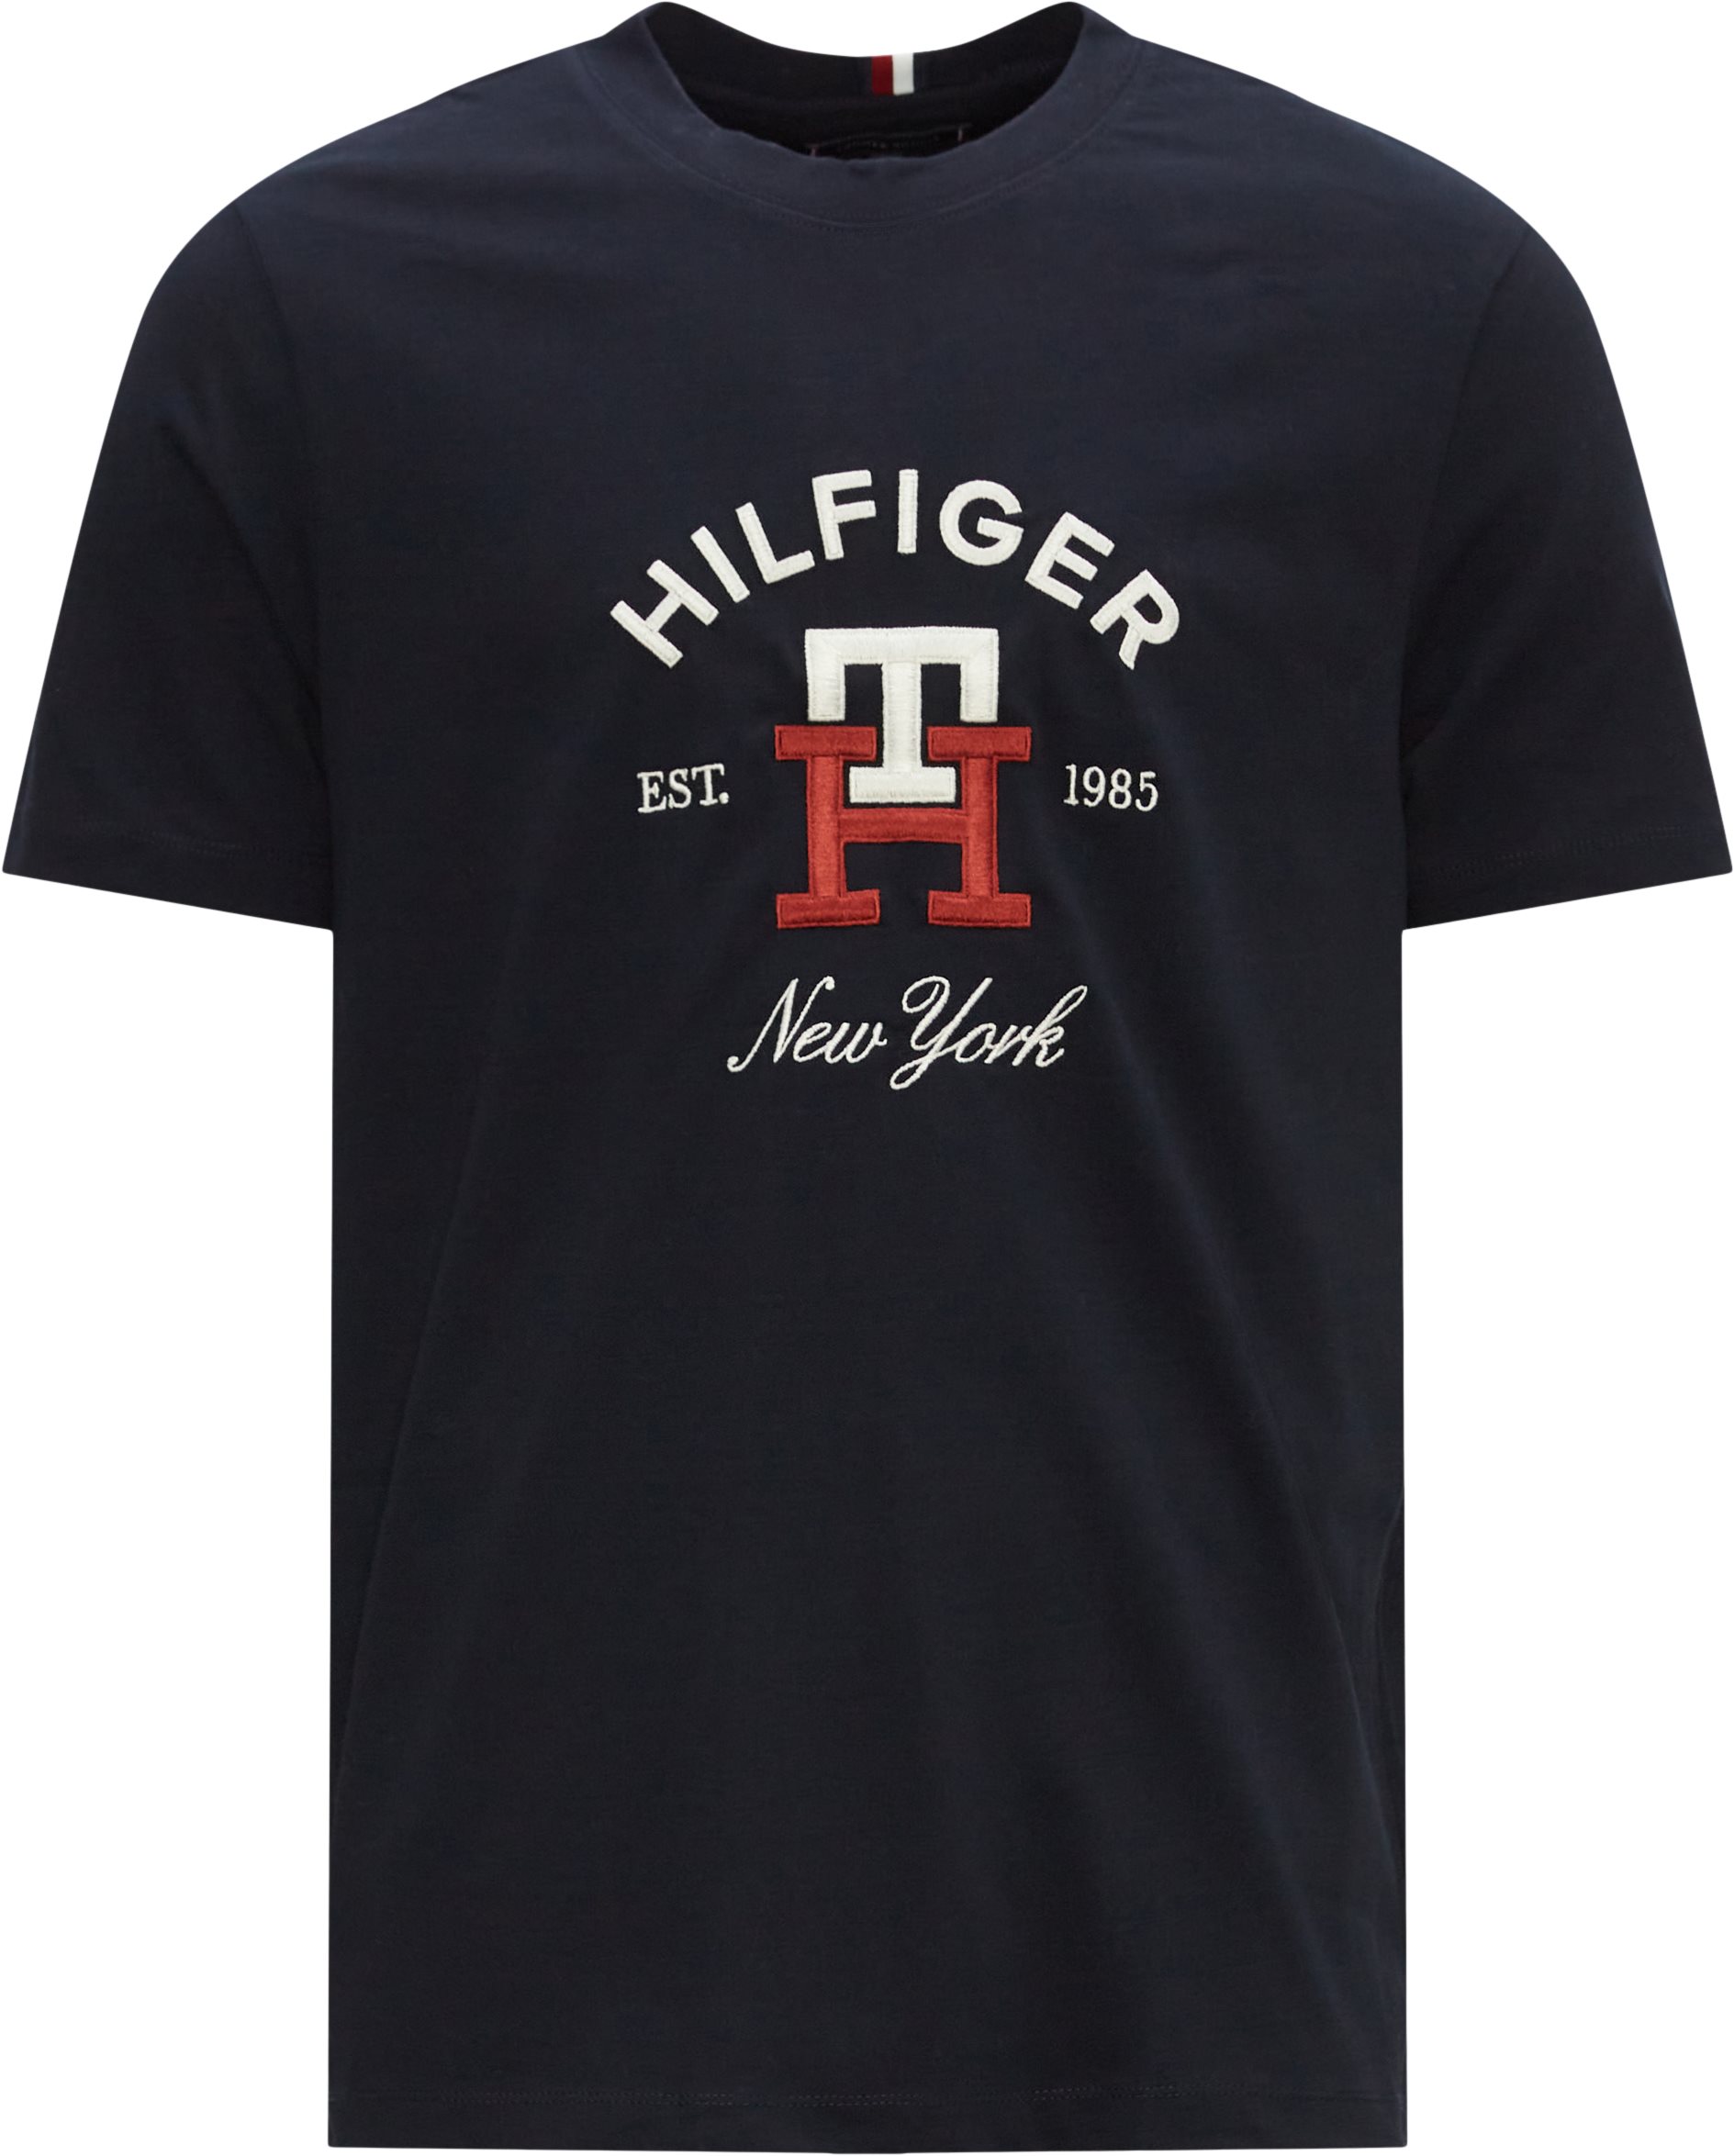 EUR NAVY T-shirts Tommy Hilfiger 40 TEE 30043 CURVED MONOGRAM from